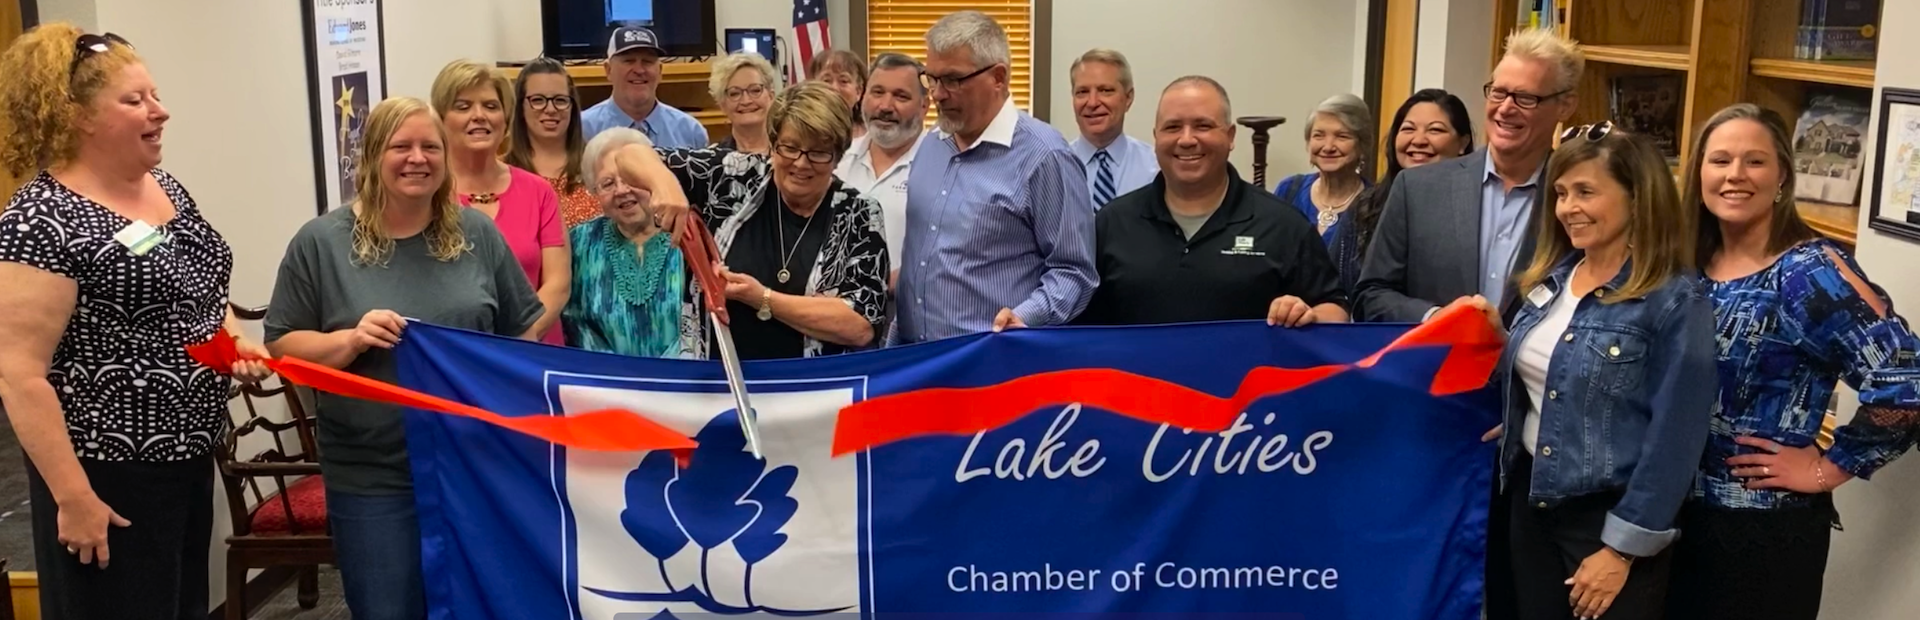 Lake Cities Chamber of Commerce Ribbon Cutting | Aflac-Kathy Carlson | 05-19-21